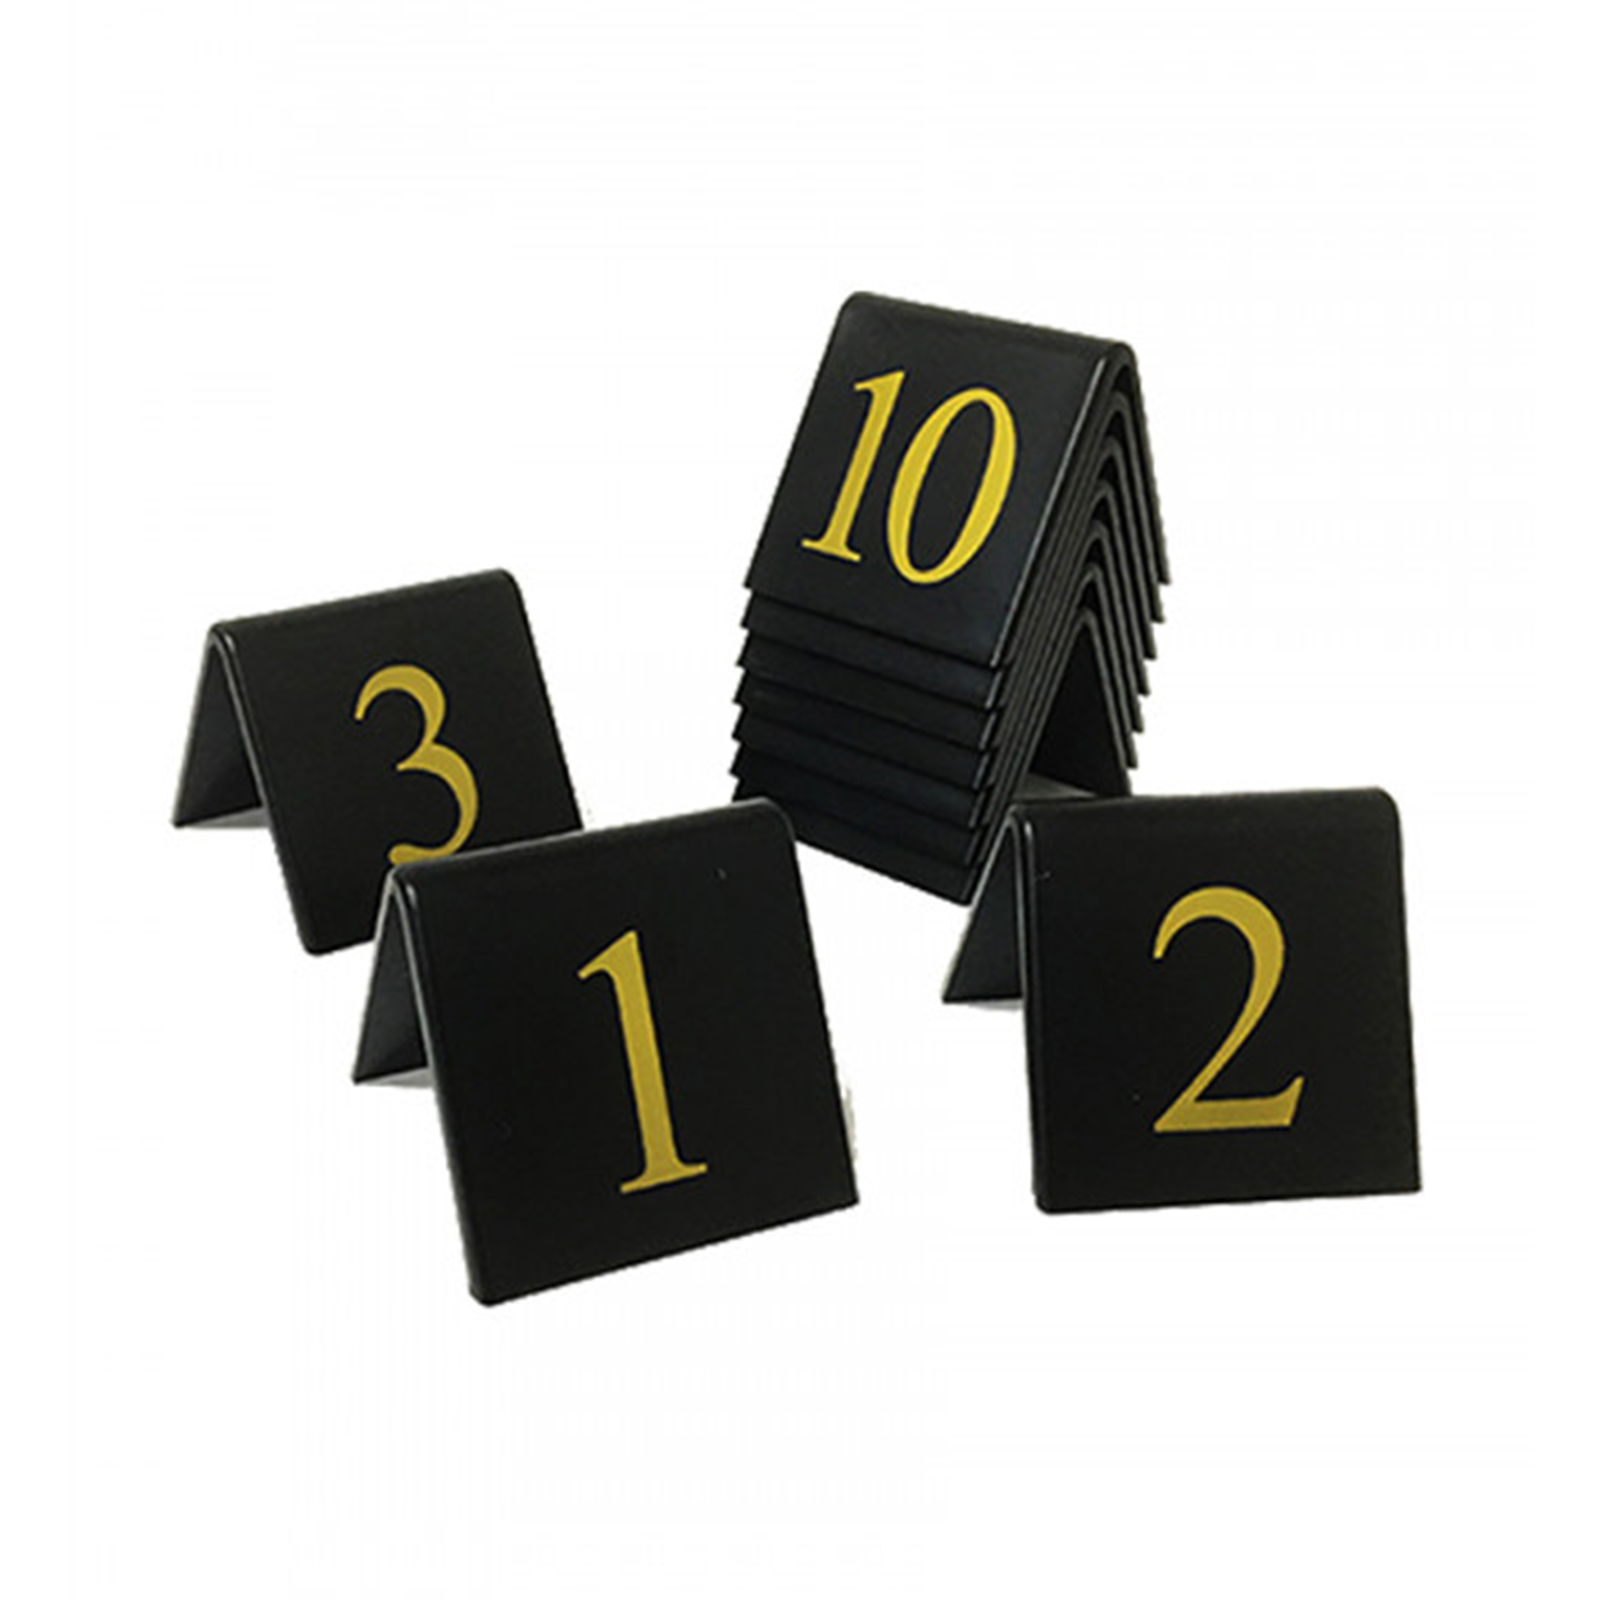 PLASTIC TABLE NUMBERS SET 11 TO 20 Restaurant cafe 